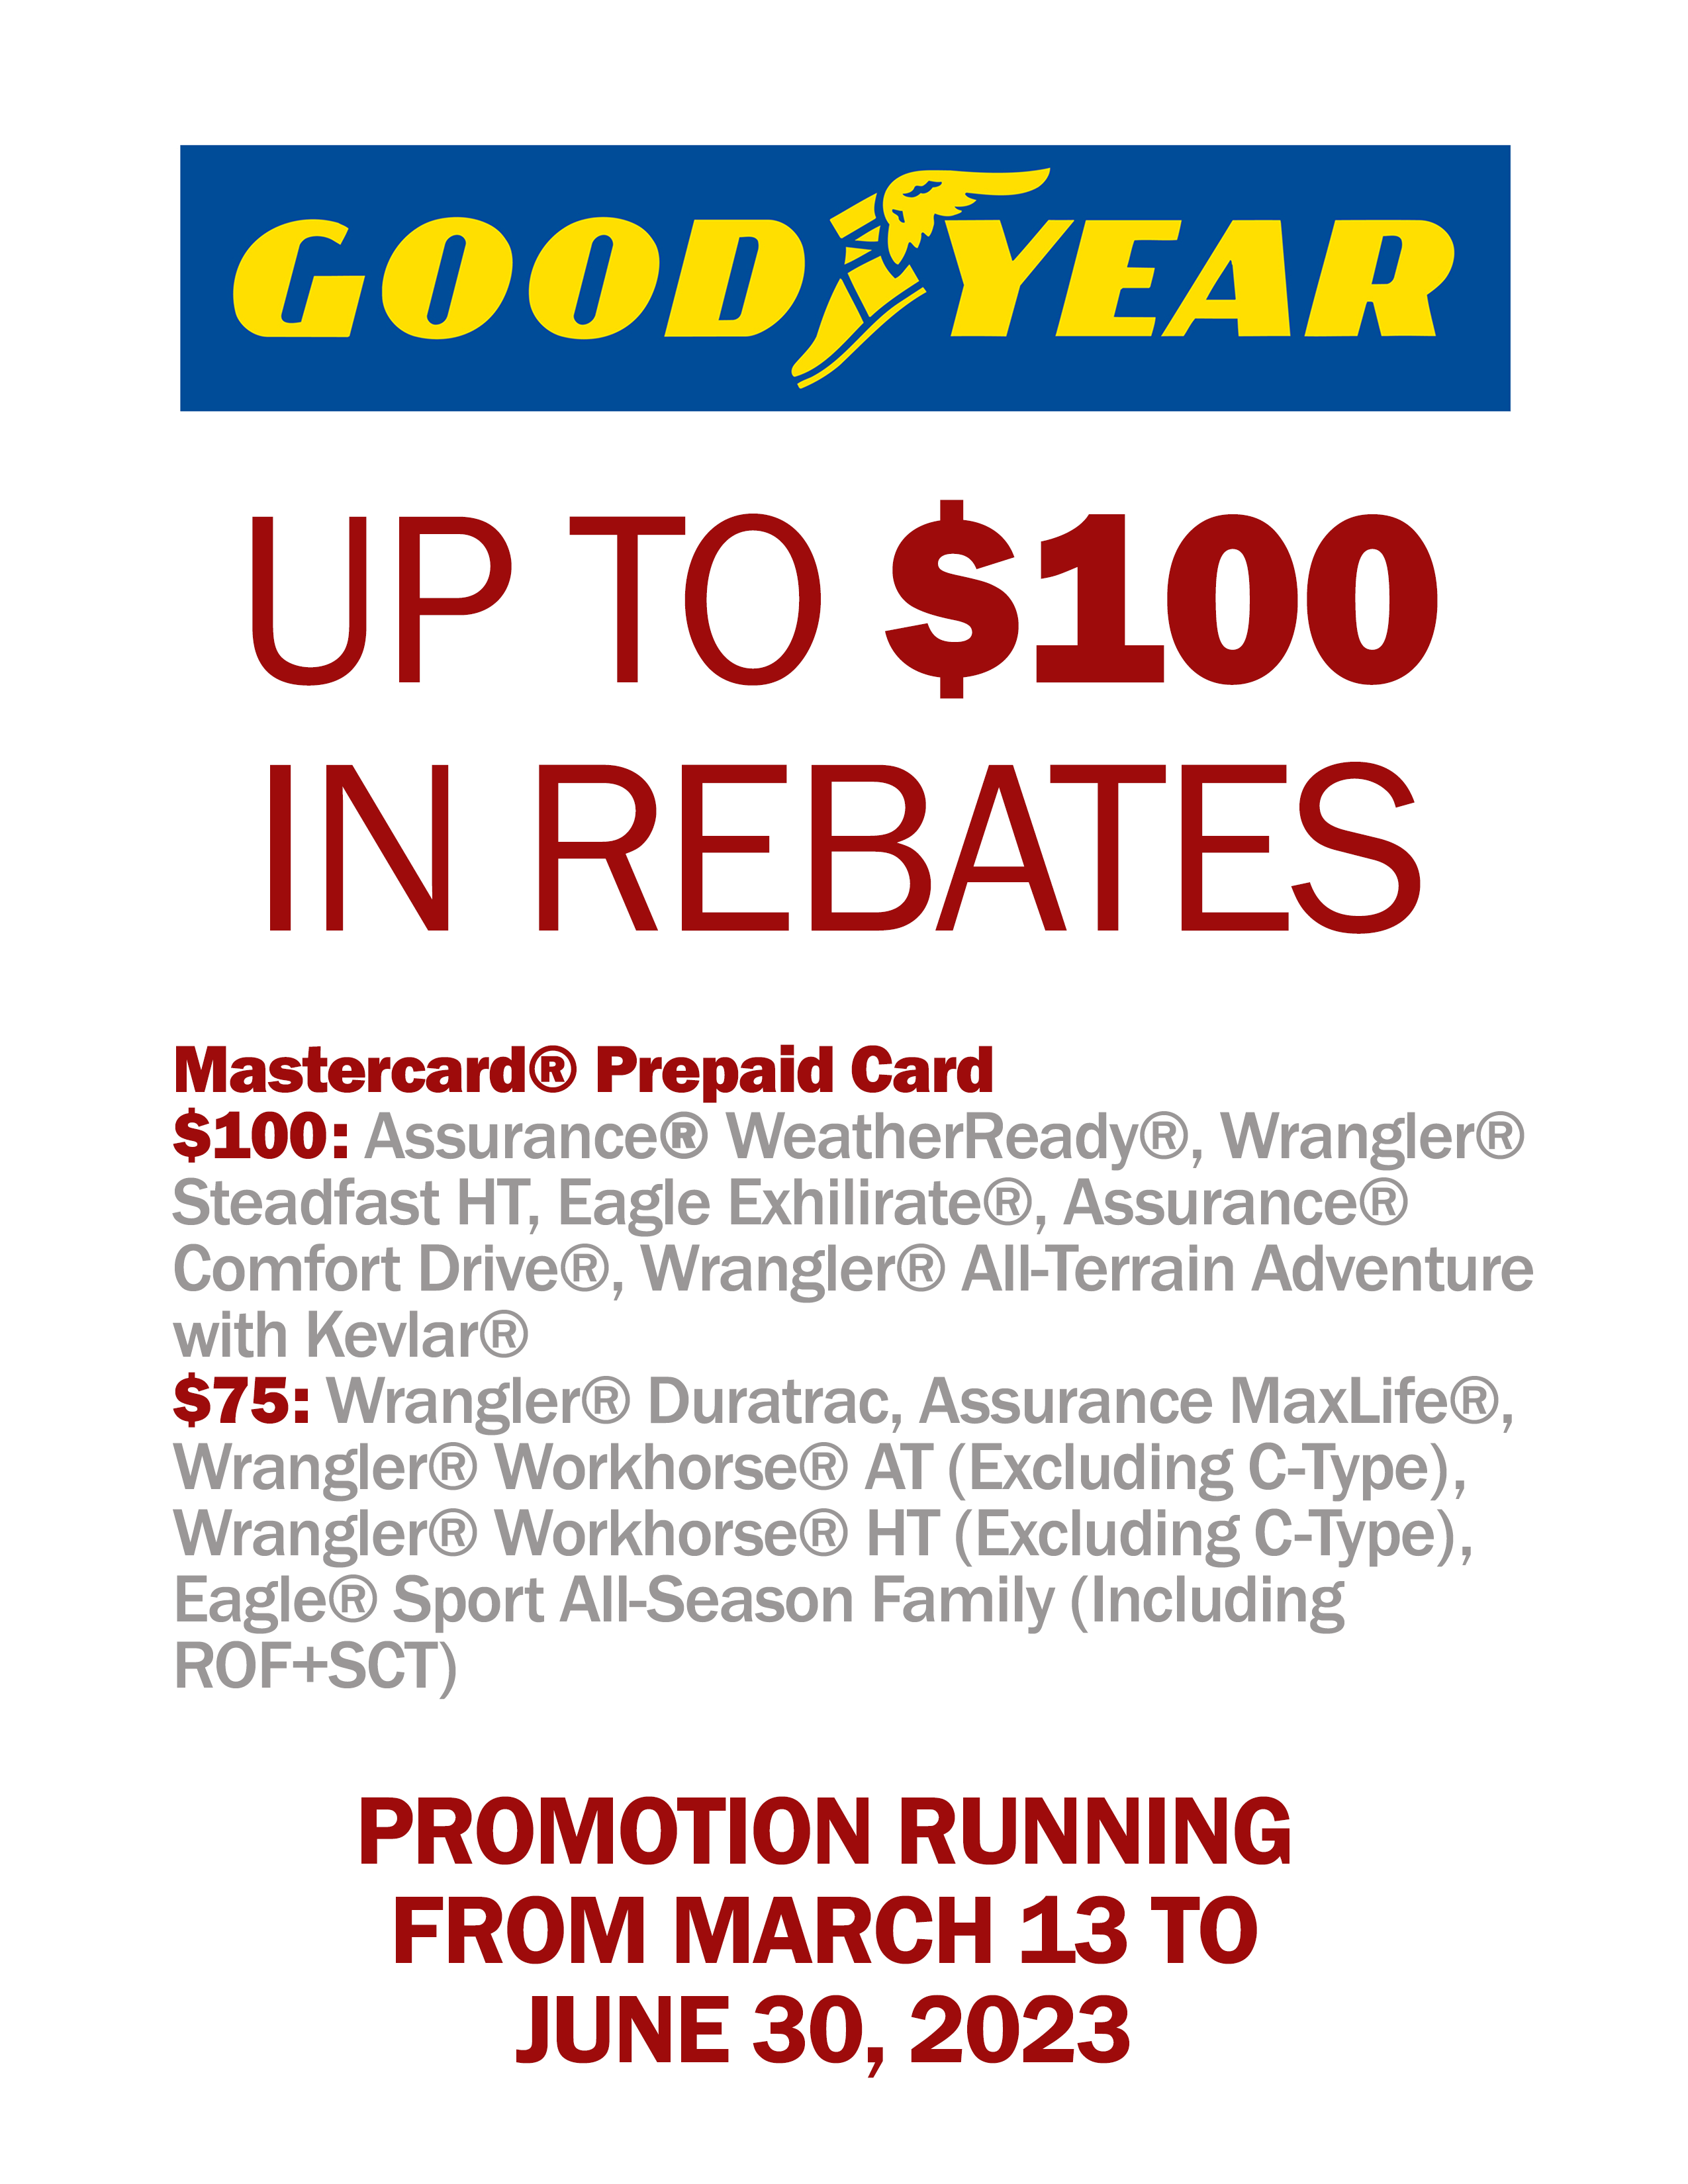 Goodyear Spring 2023 Rebate Downtown Auto Specialist